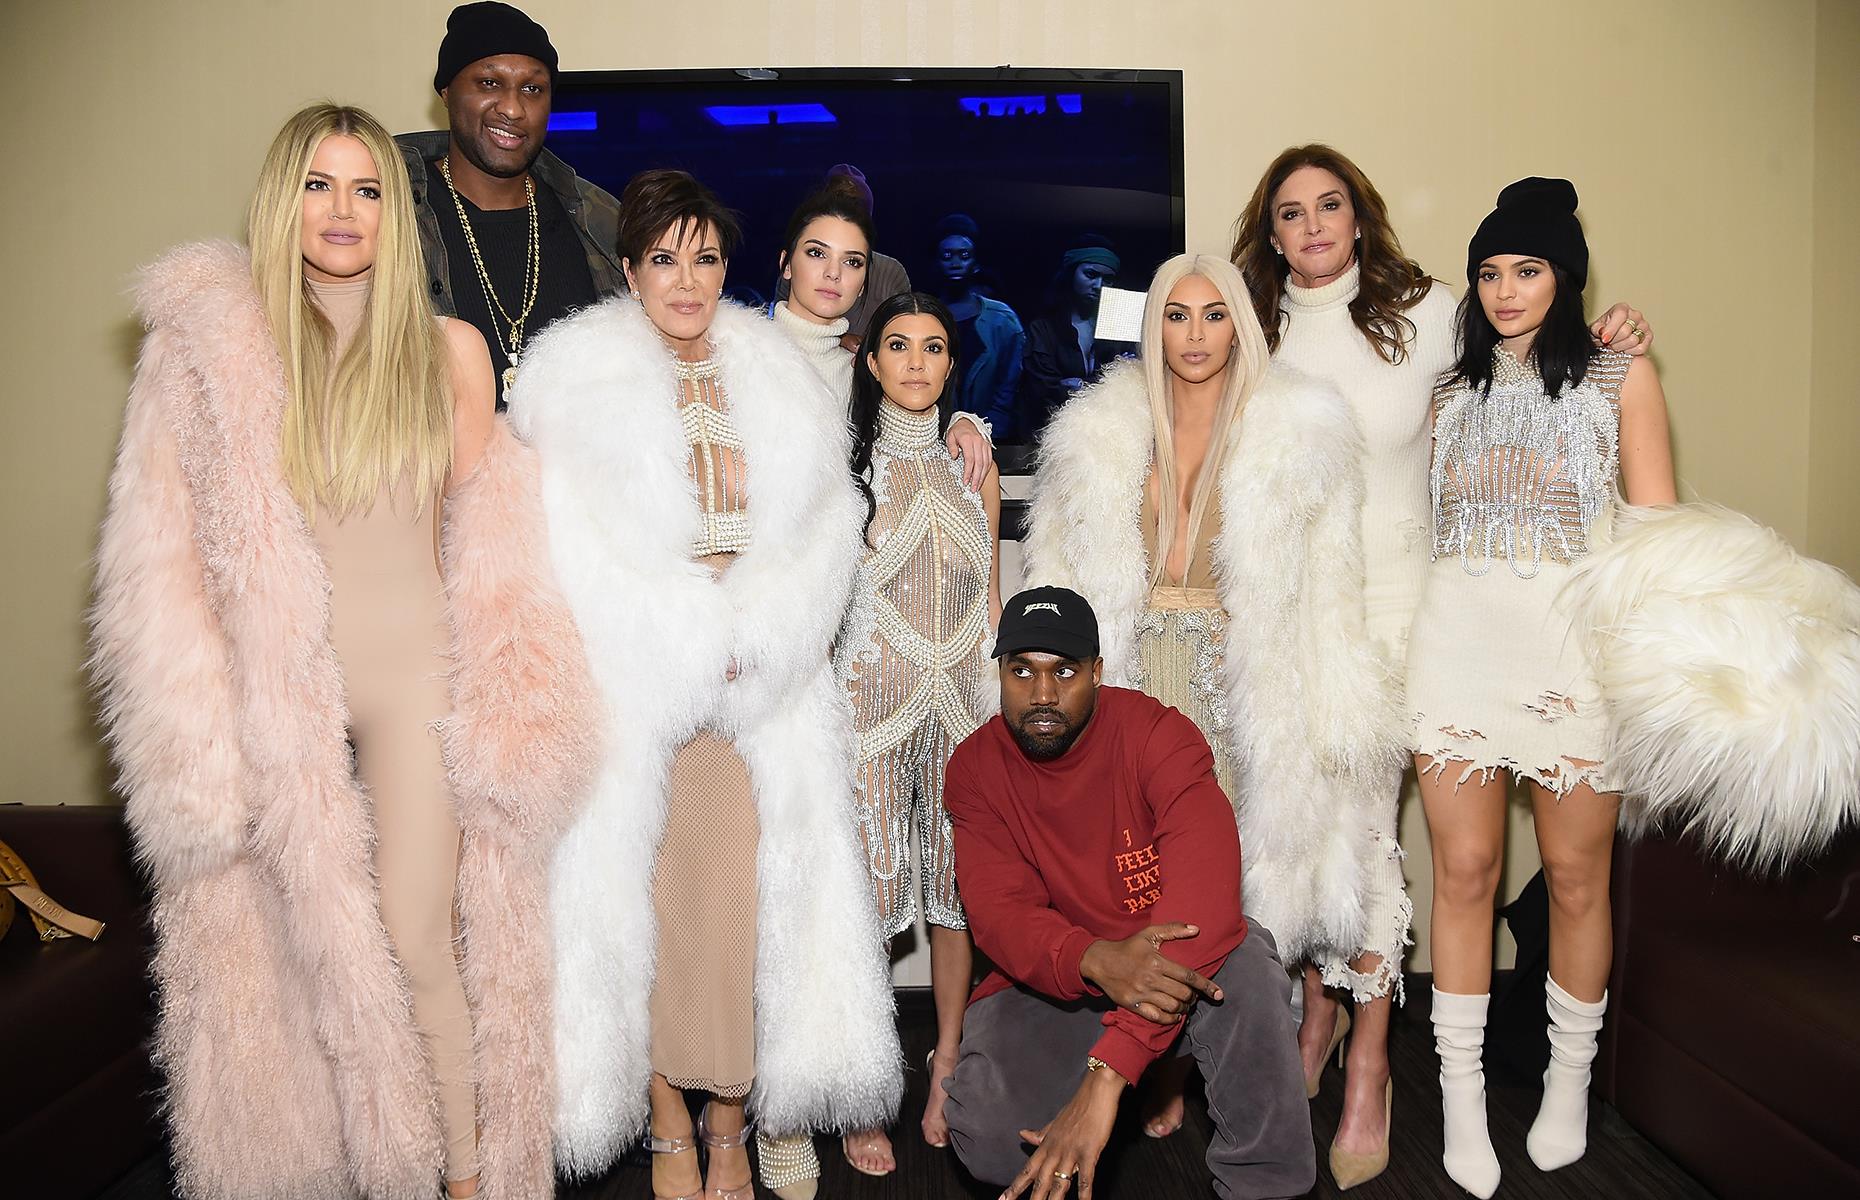 Myth 11: Millennials are too interested in keeping up with the Kardashians